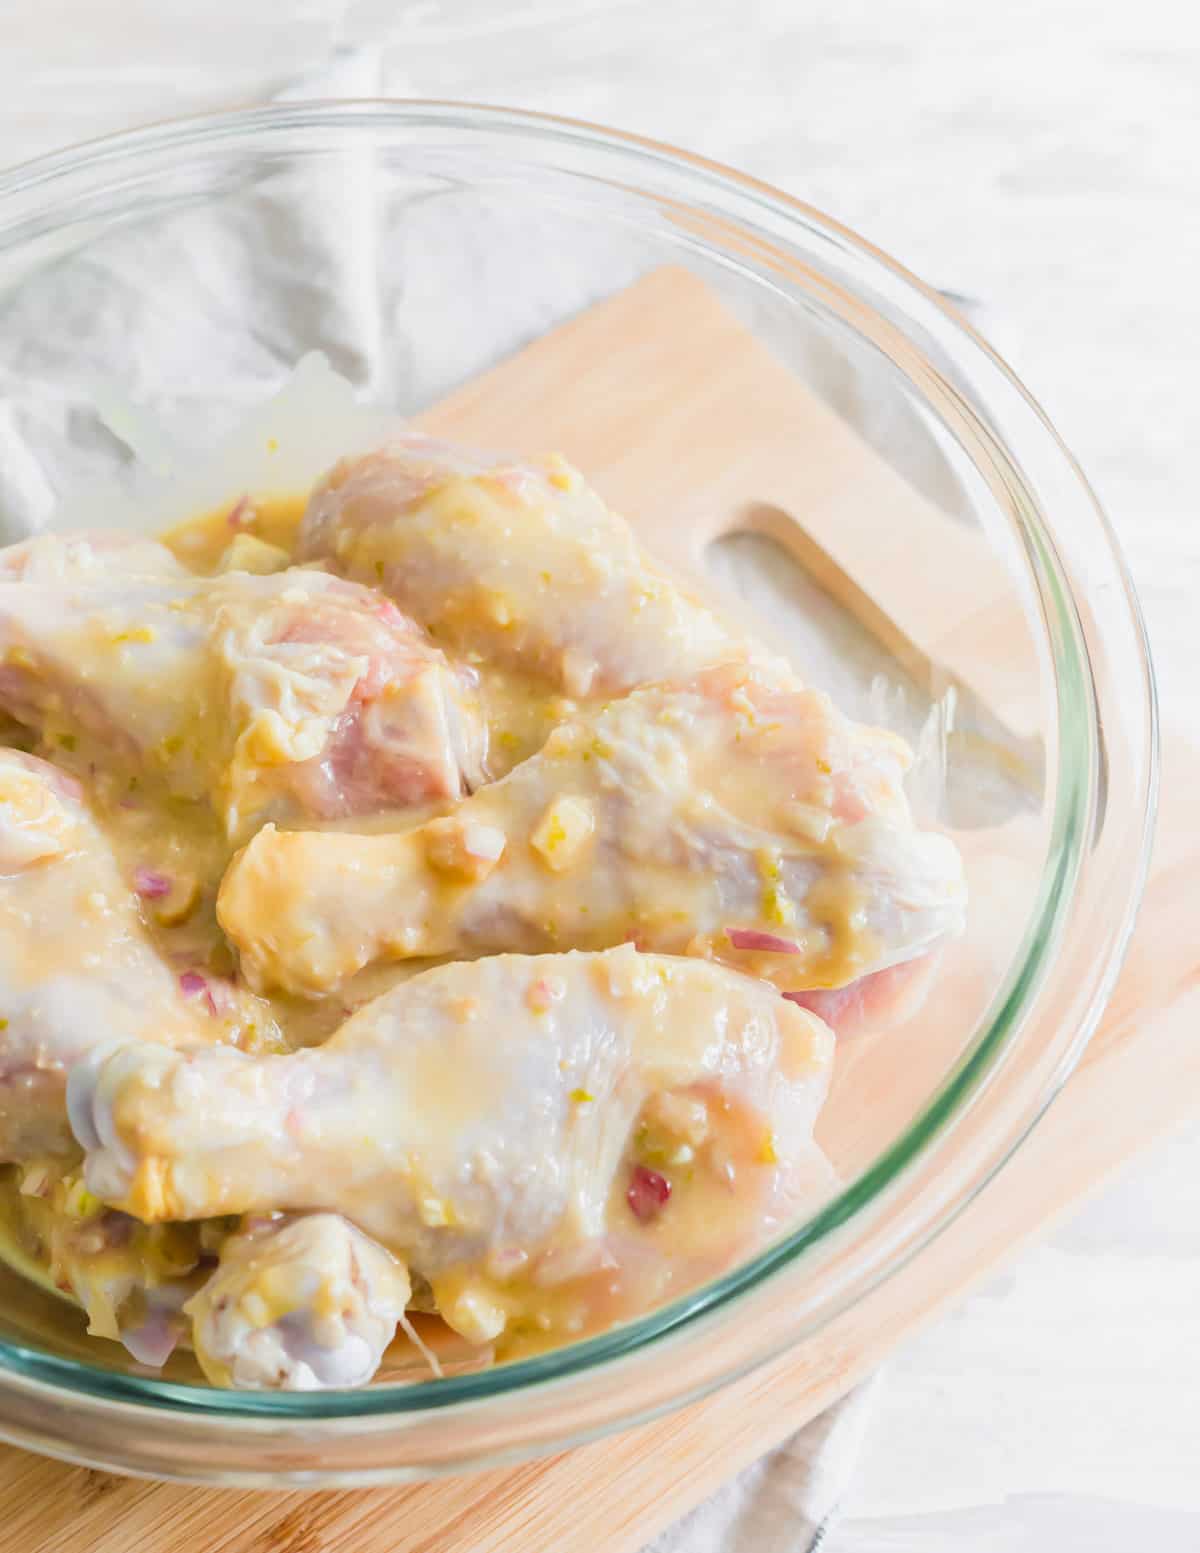 Marinating chicken with miso glaze before baking in a skillet.